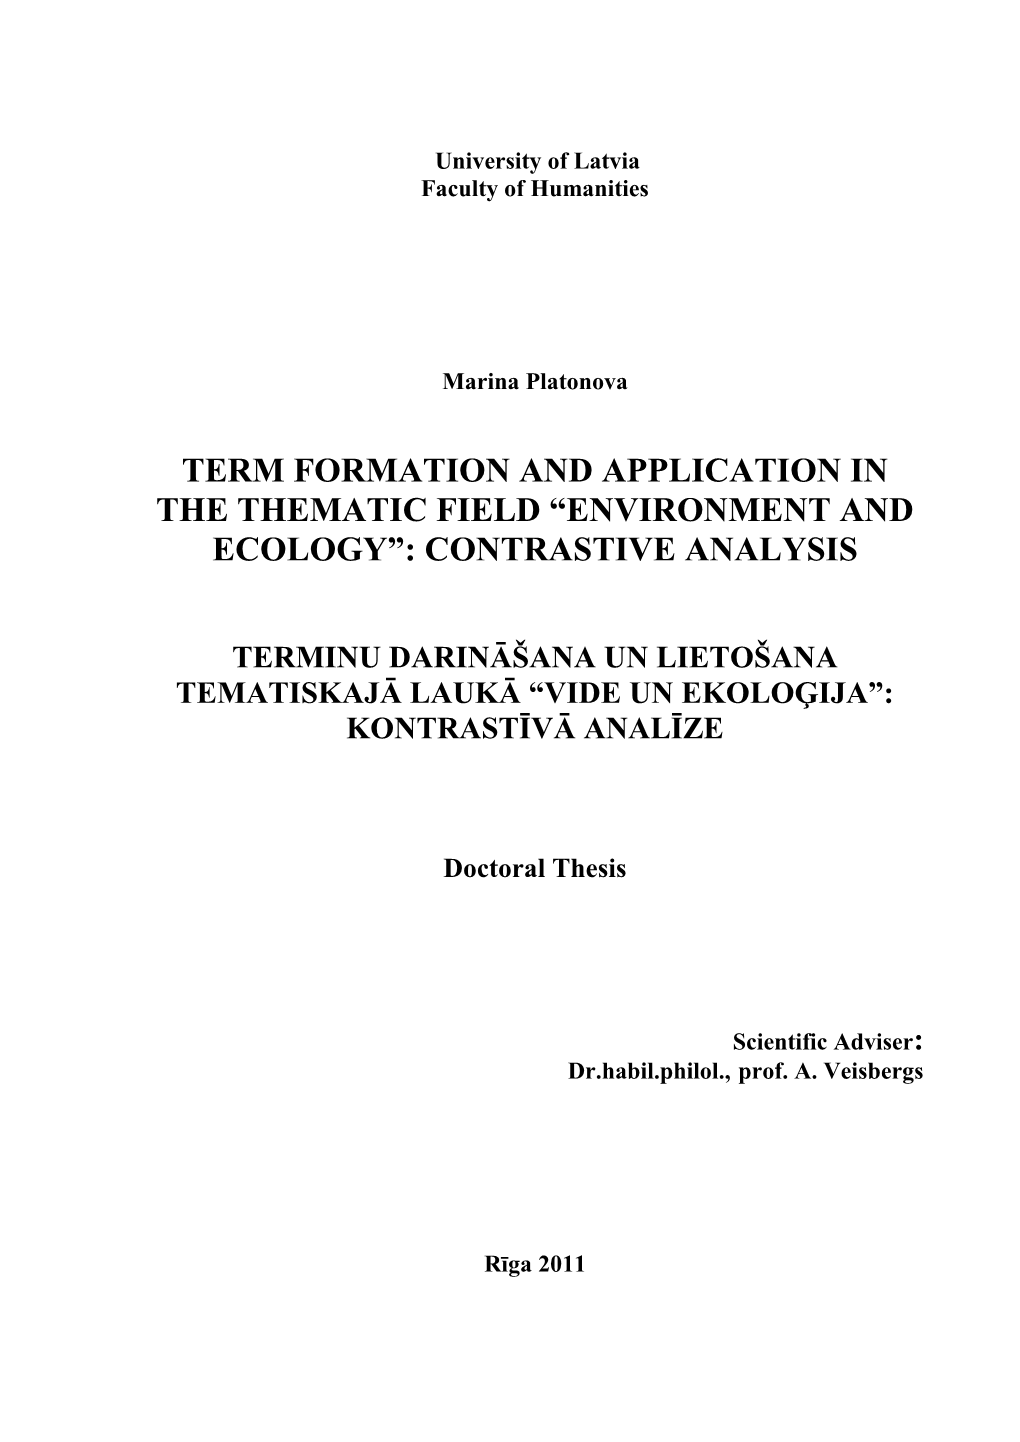 Term Formation and Application in the Thematic Field “Environment and Ecology”: Contrastive Analysis